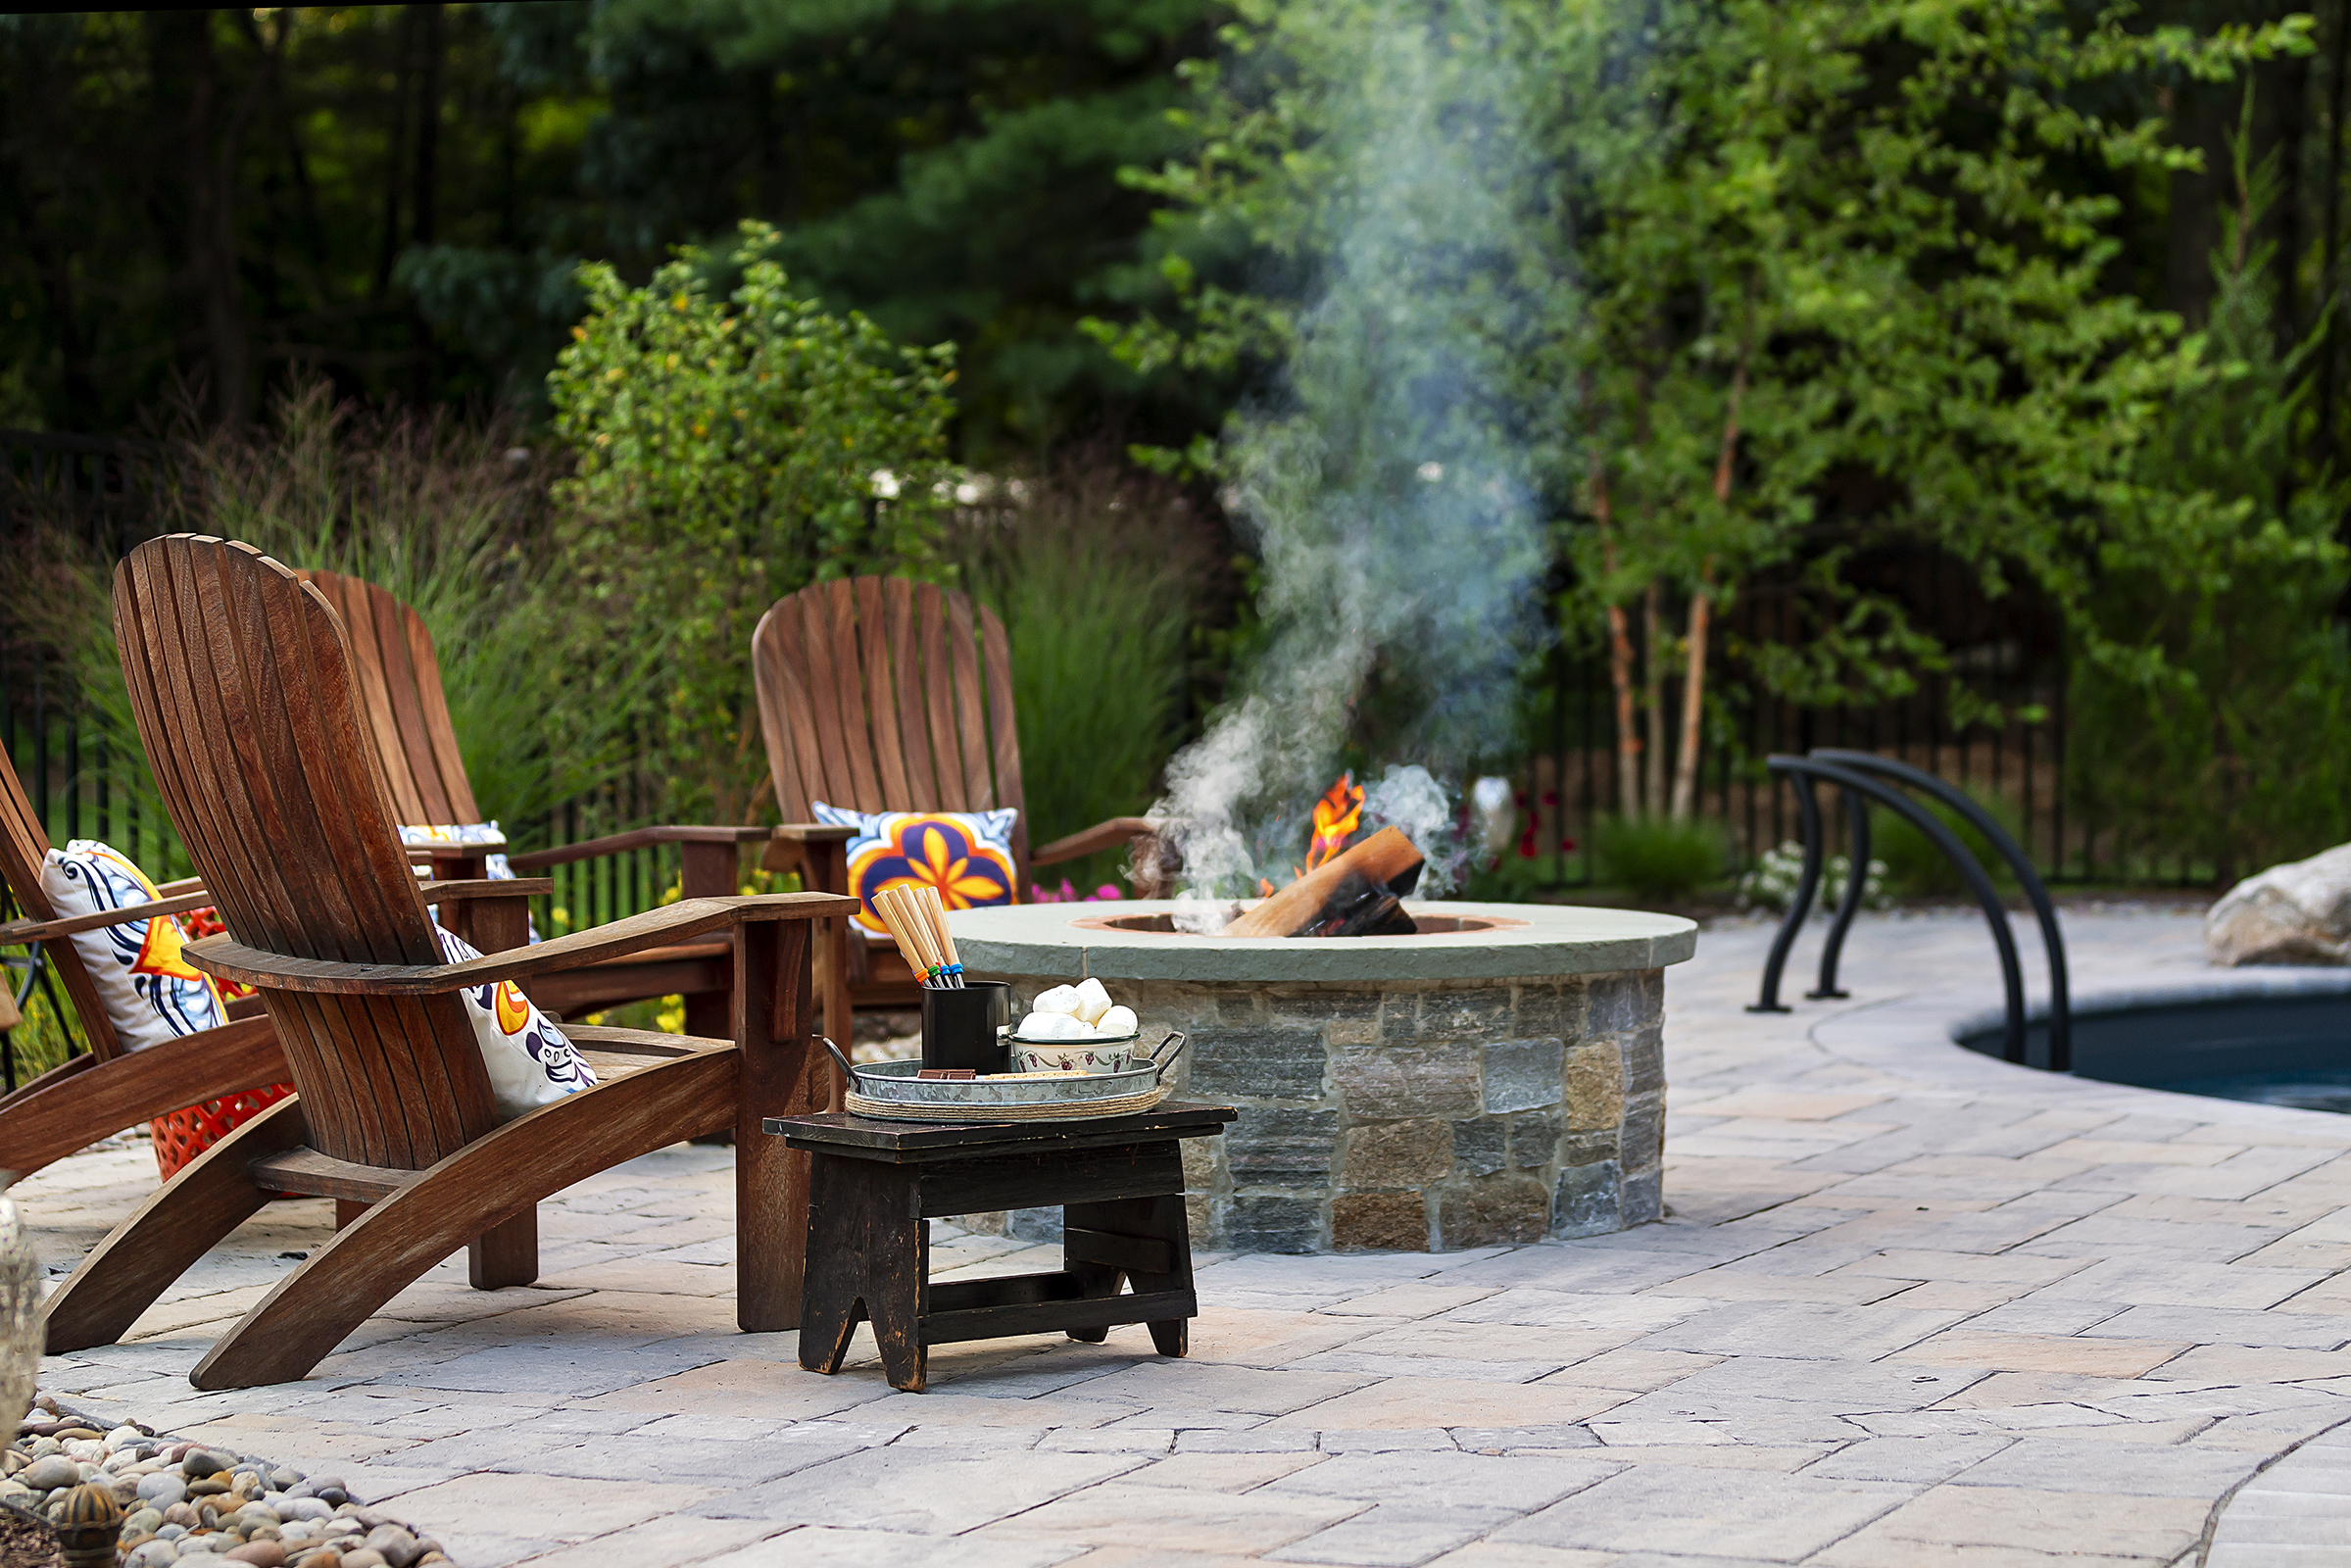 Stow MA Pool fire pit and smore kit